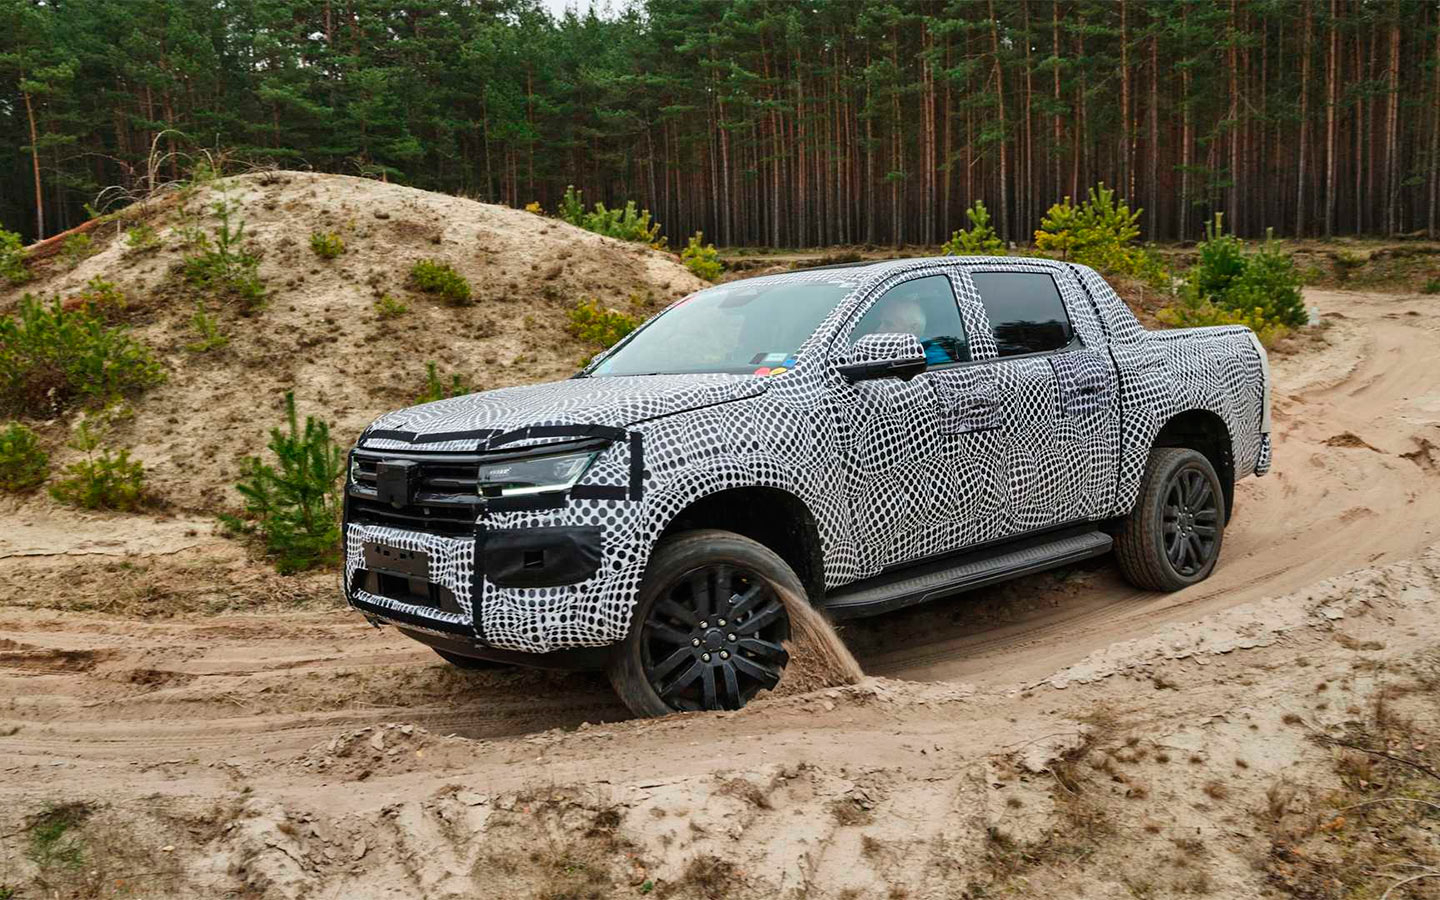 Volkswagen named the characteristics of the new Amarok